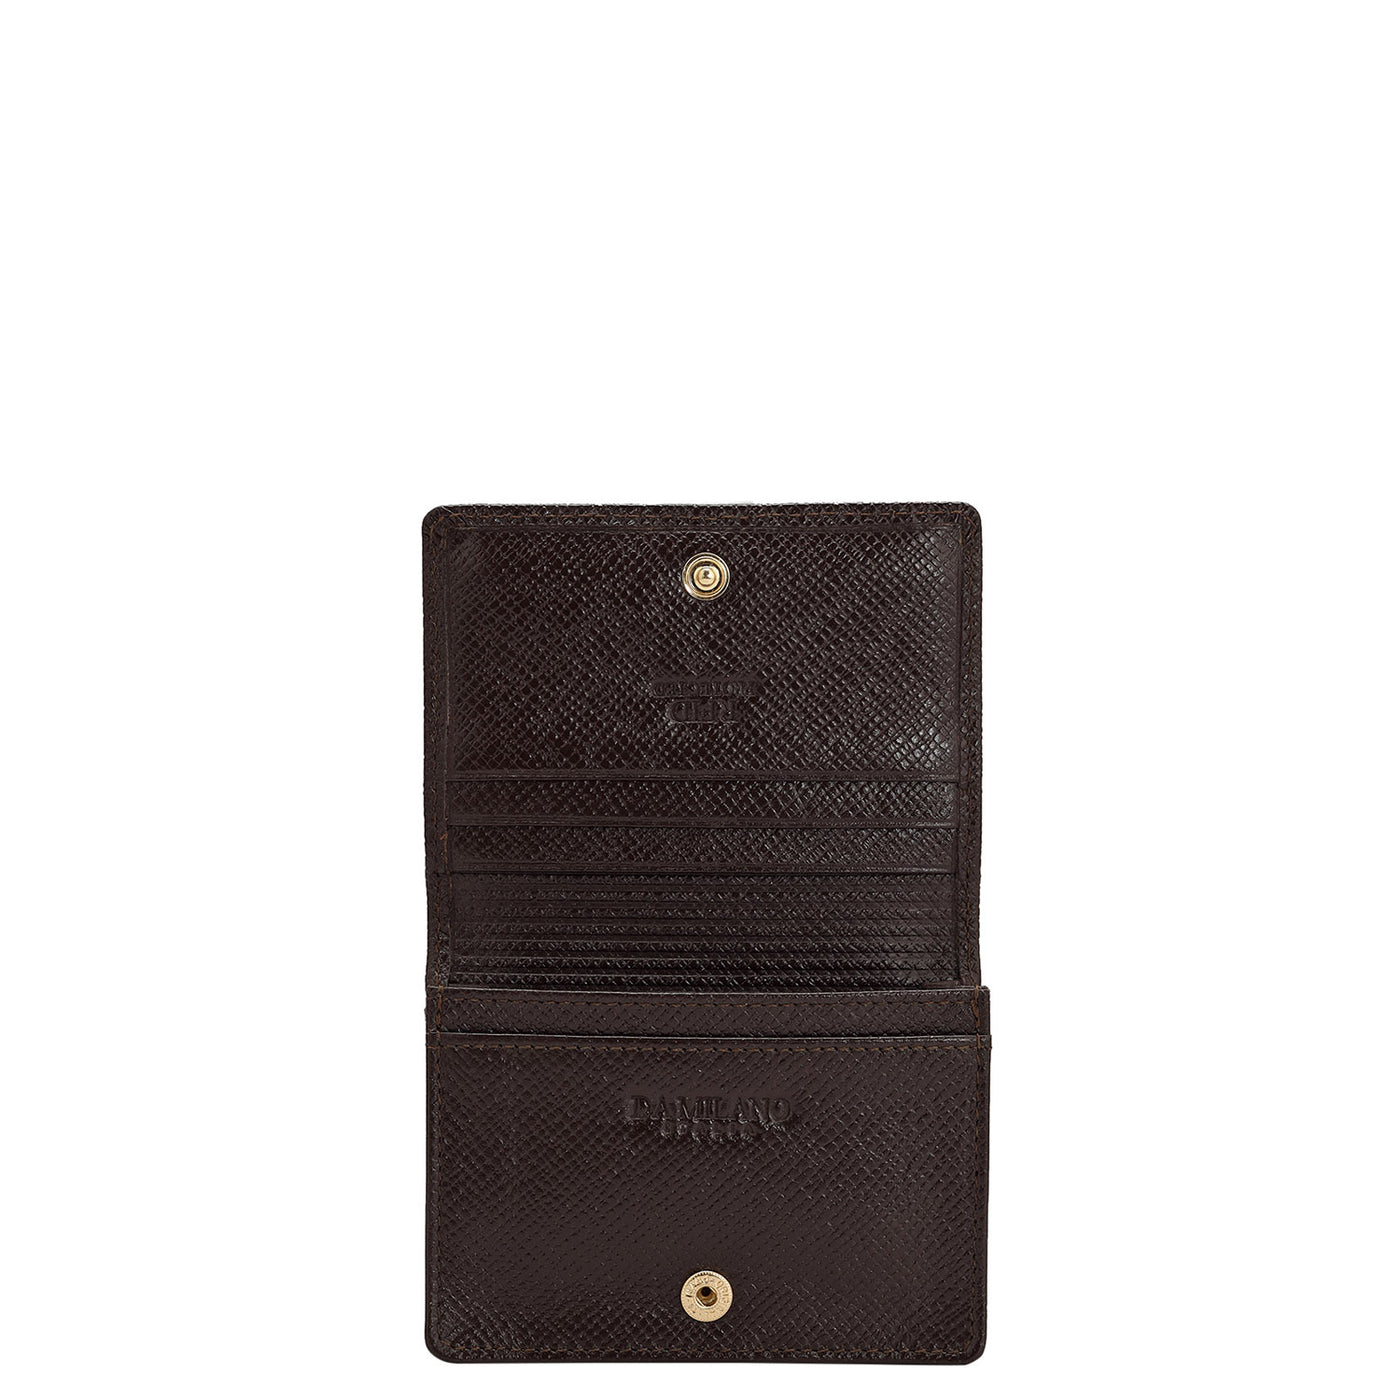 Franzy Leather Card Case - Chocolate